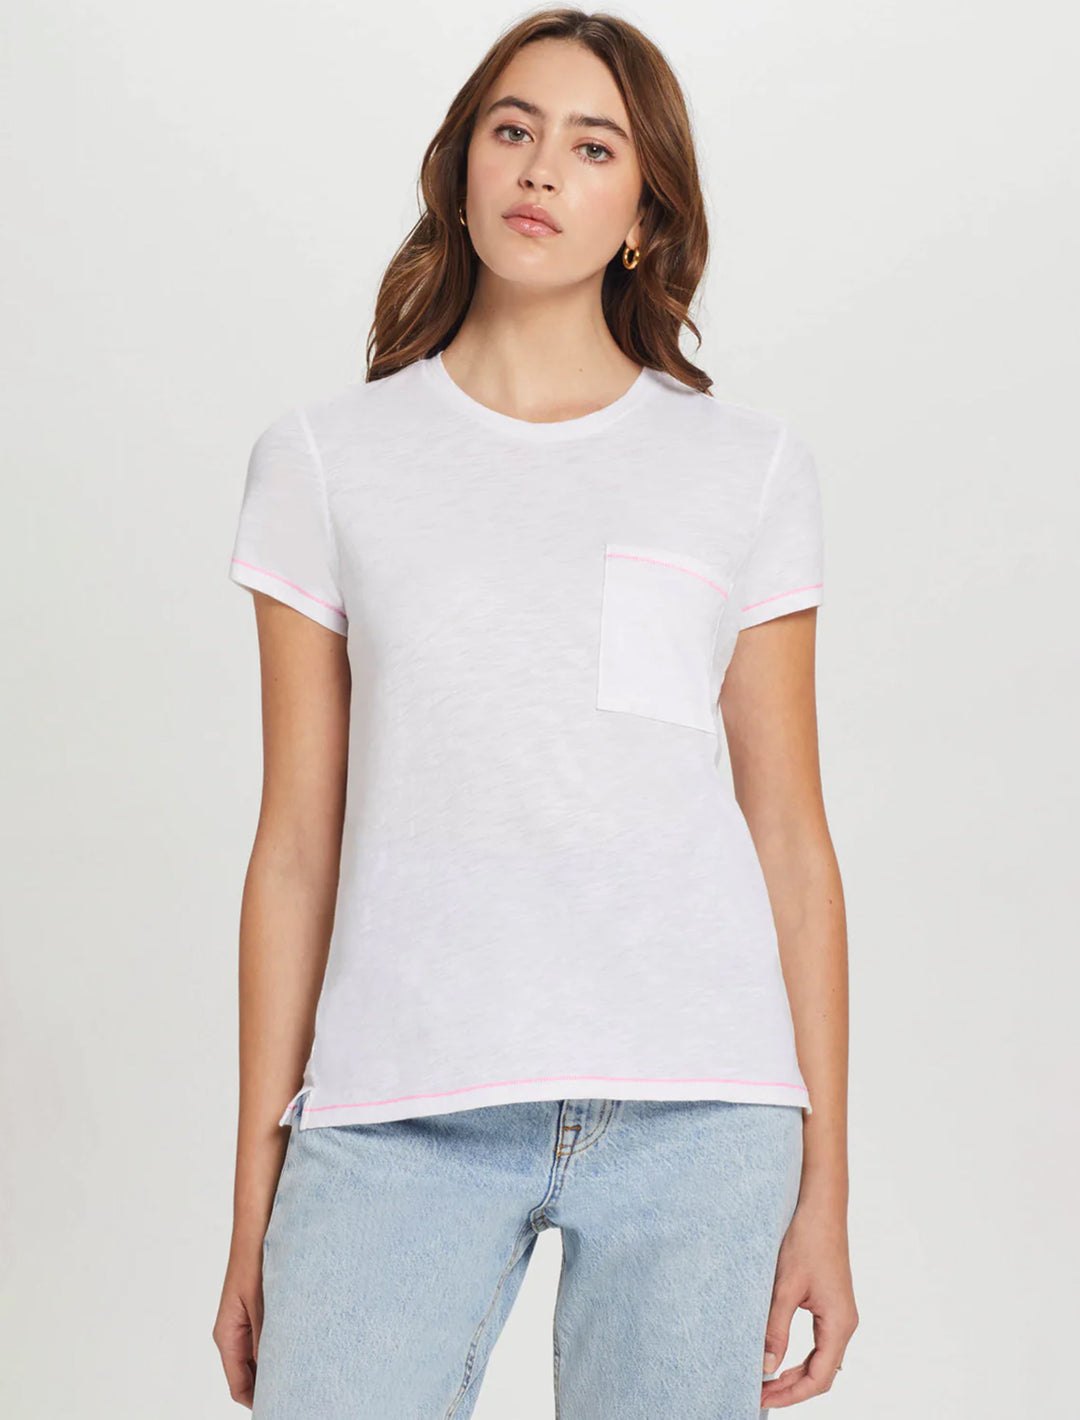 Model wearing Goldie Lewinter's contrast stitch pocket boy tee in white and pink.